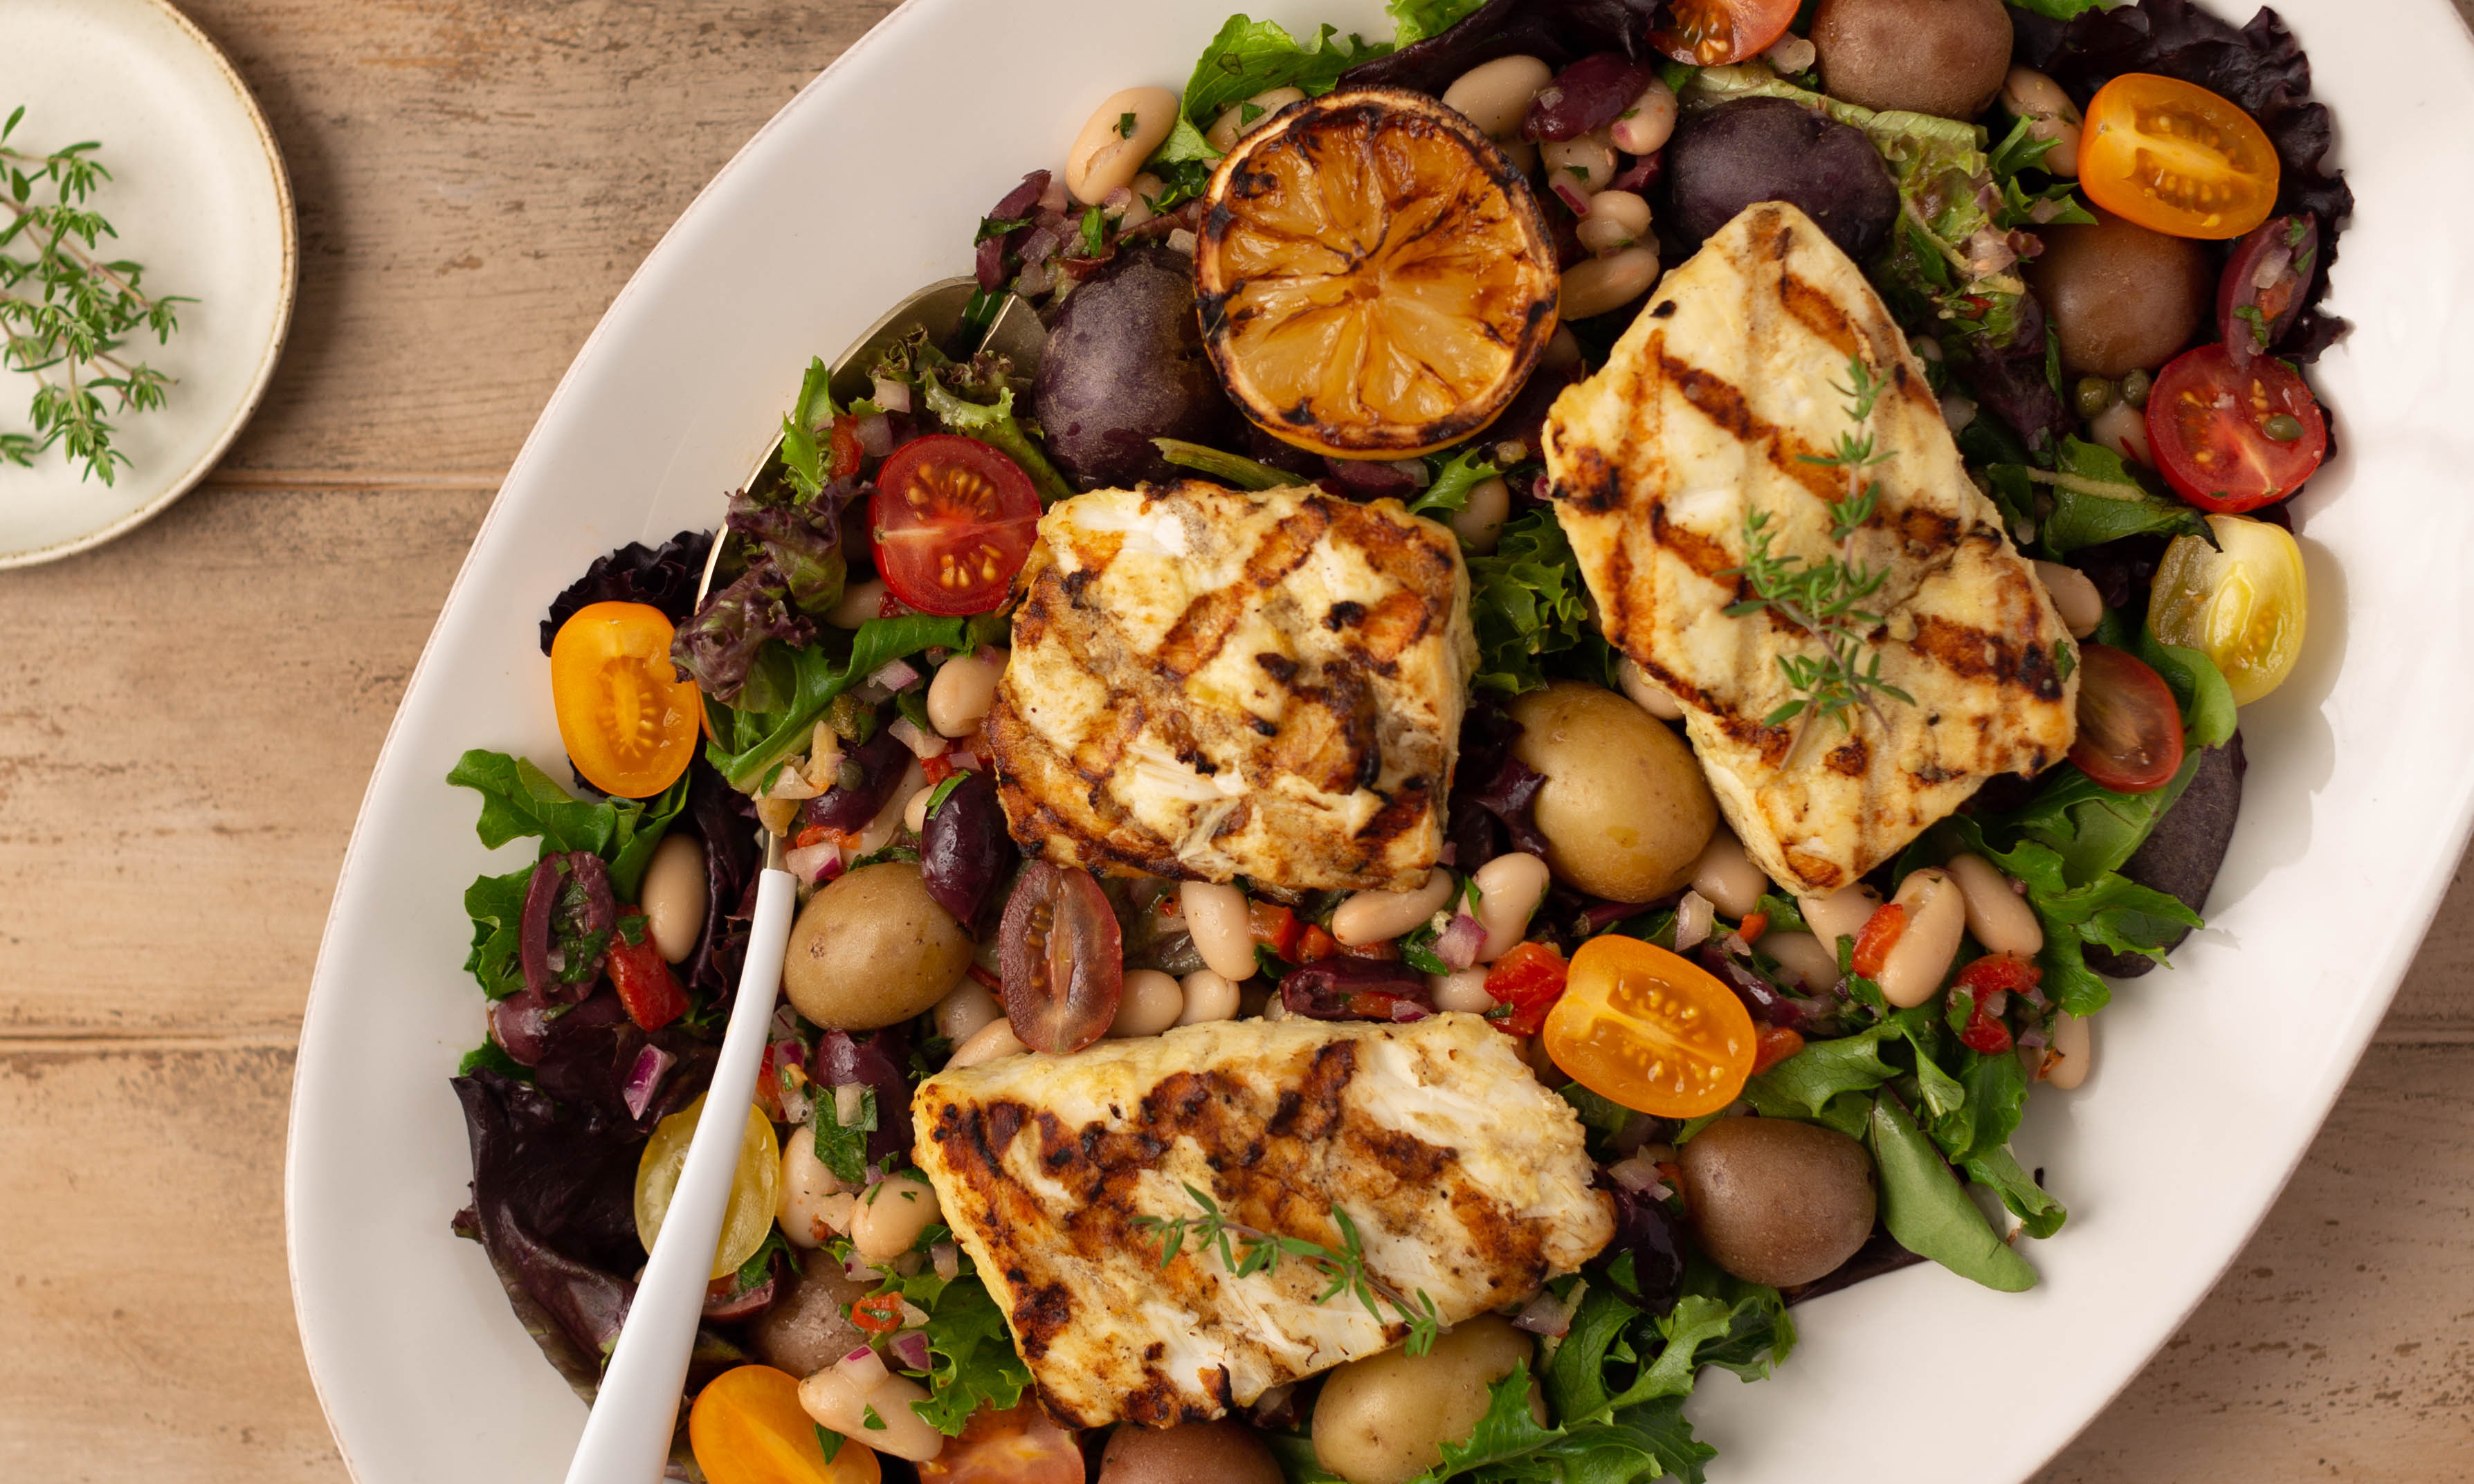 Summer Salad with Grilled Fish 